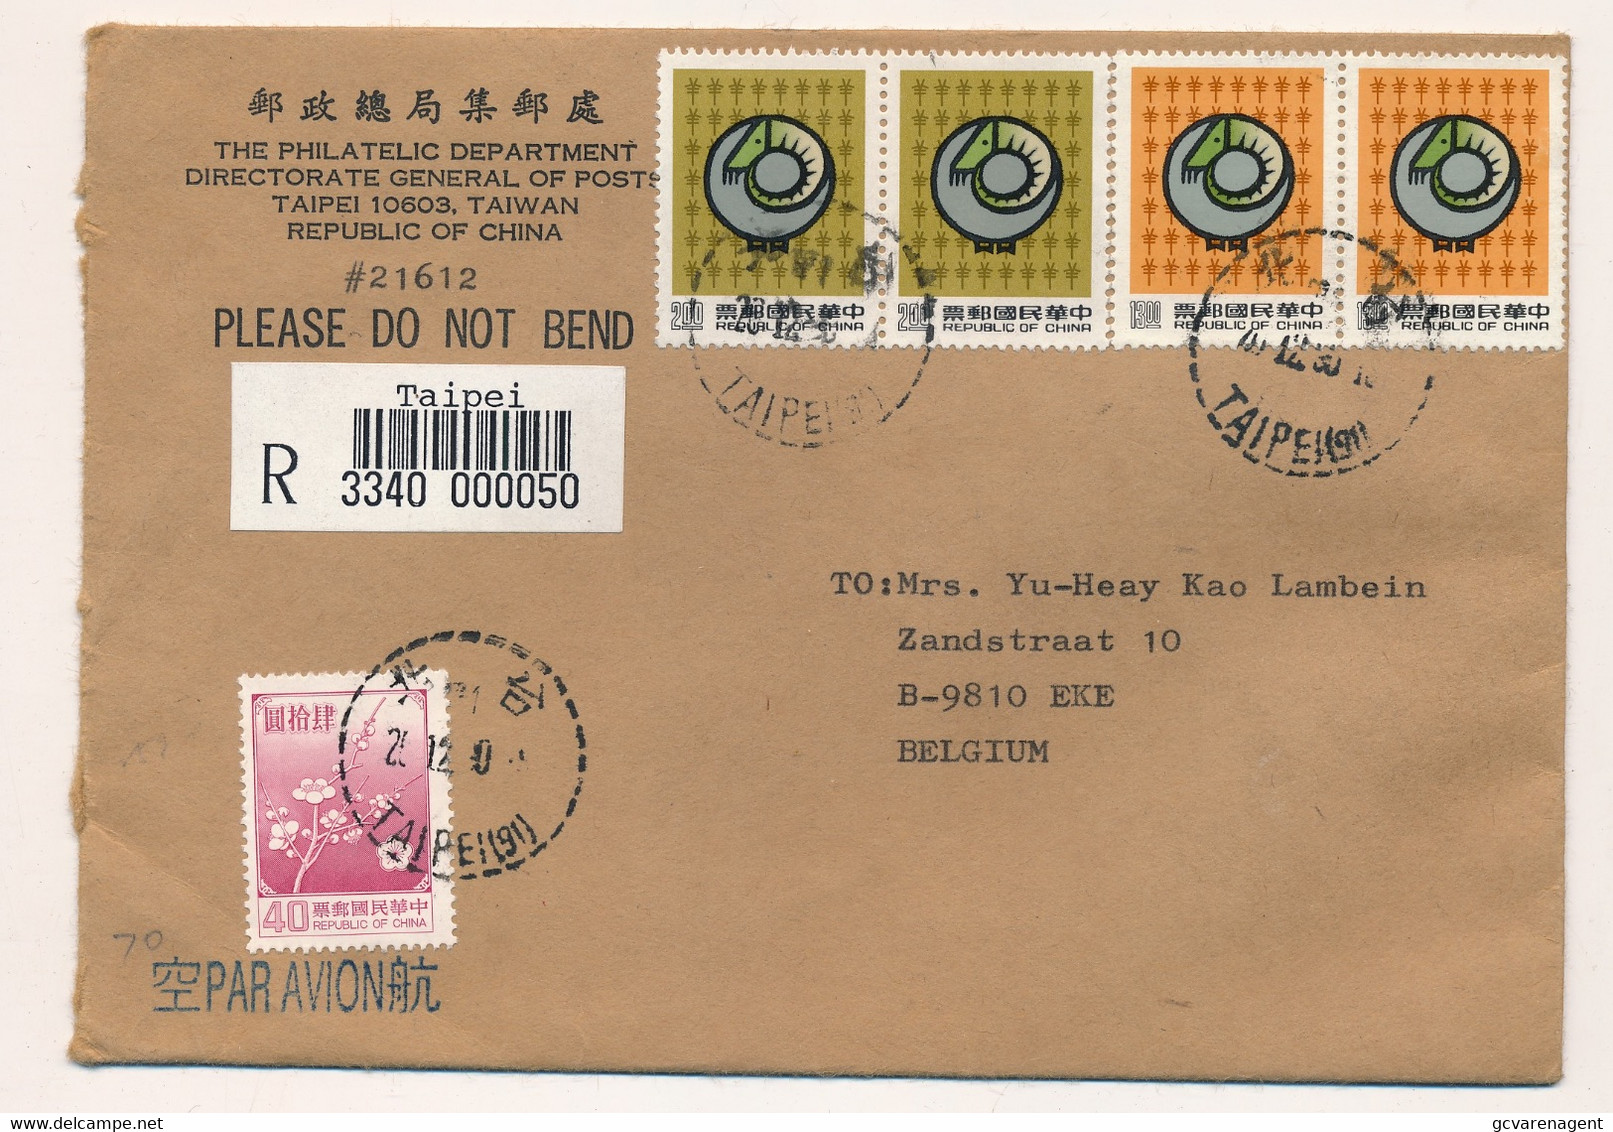 TAIWAN REPUBLIC OF CHINA     RECOMMANDE  TAIPEI - Covers & Documents